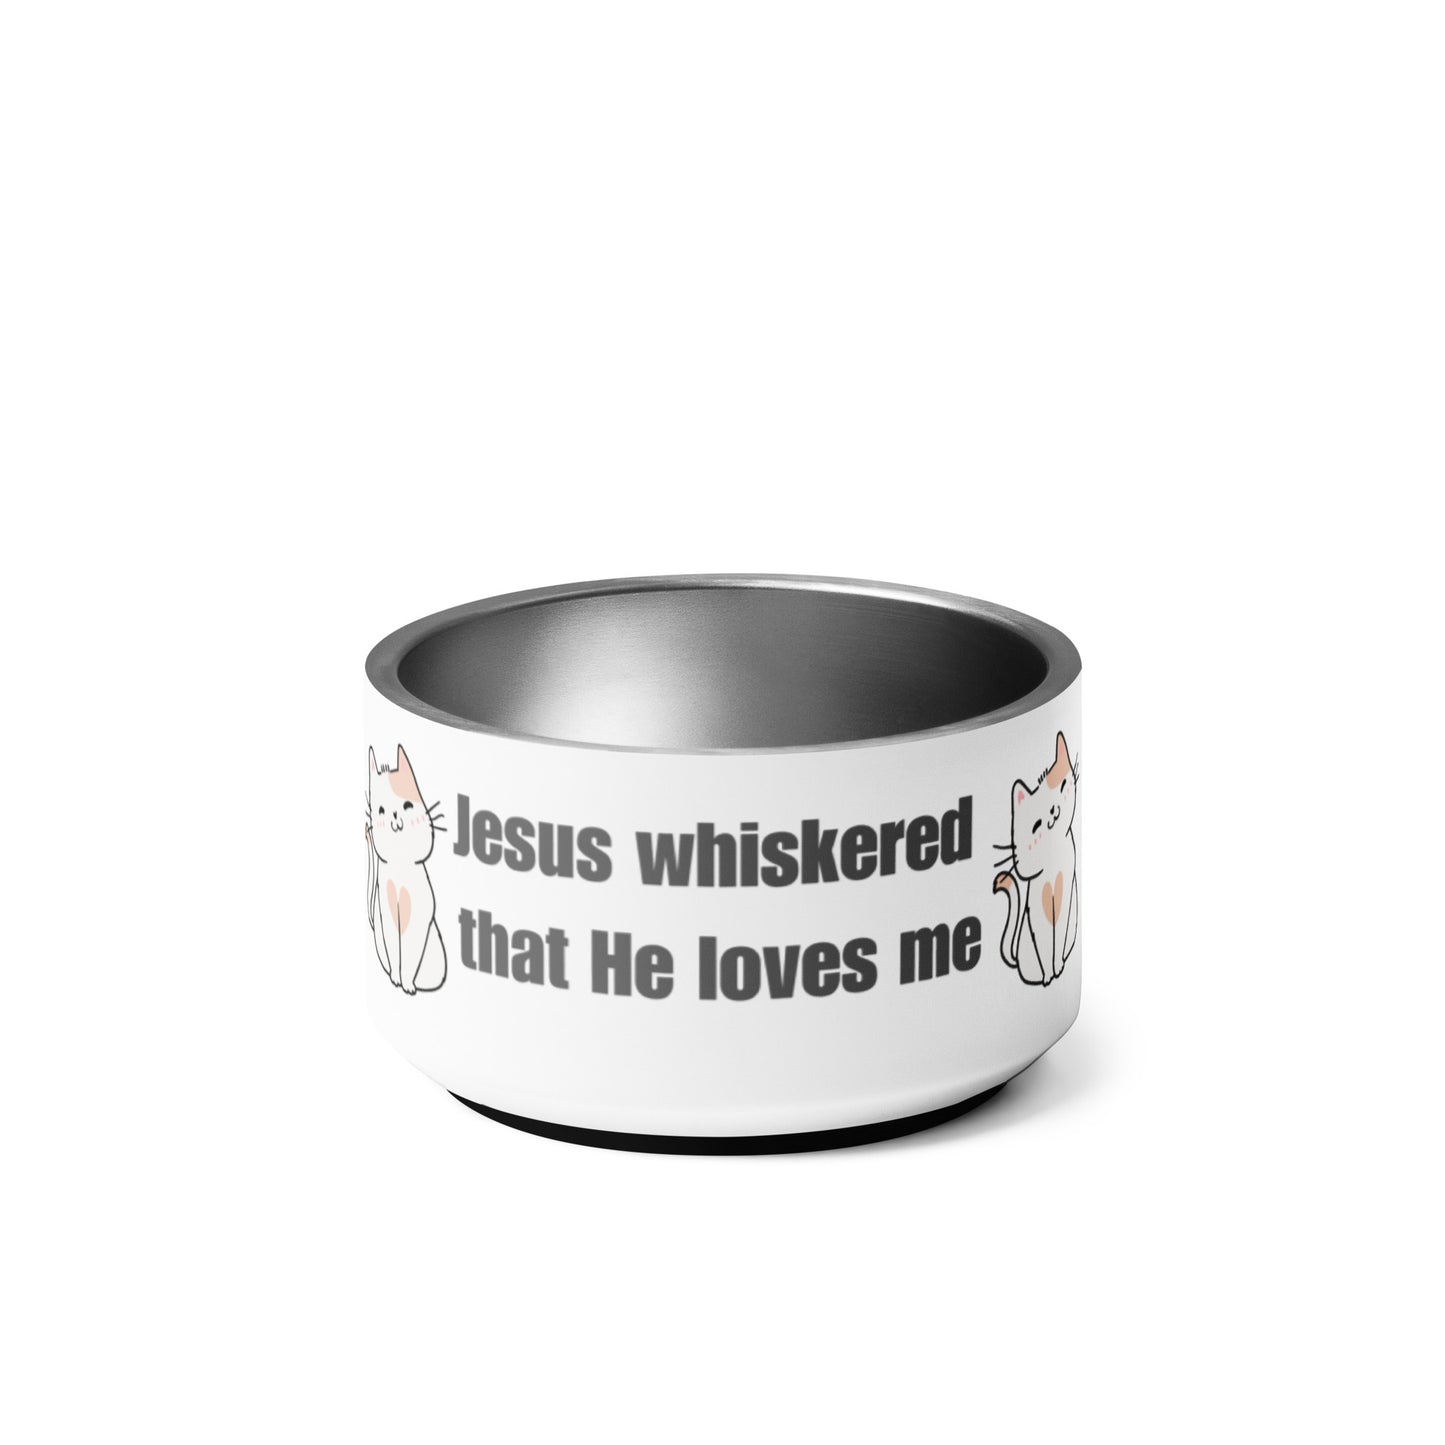 A stainless steel cat dish shown on a plain white background and the side of the dish has two cat graphics and in black, the words Jesus whiskered that He loves me, on a white background on the sides of the dish.